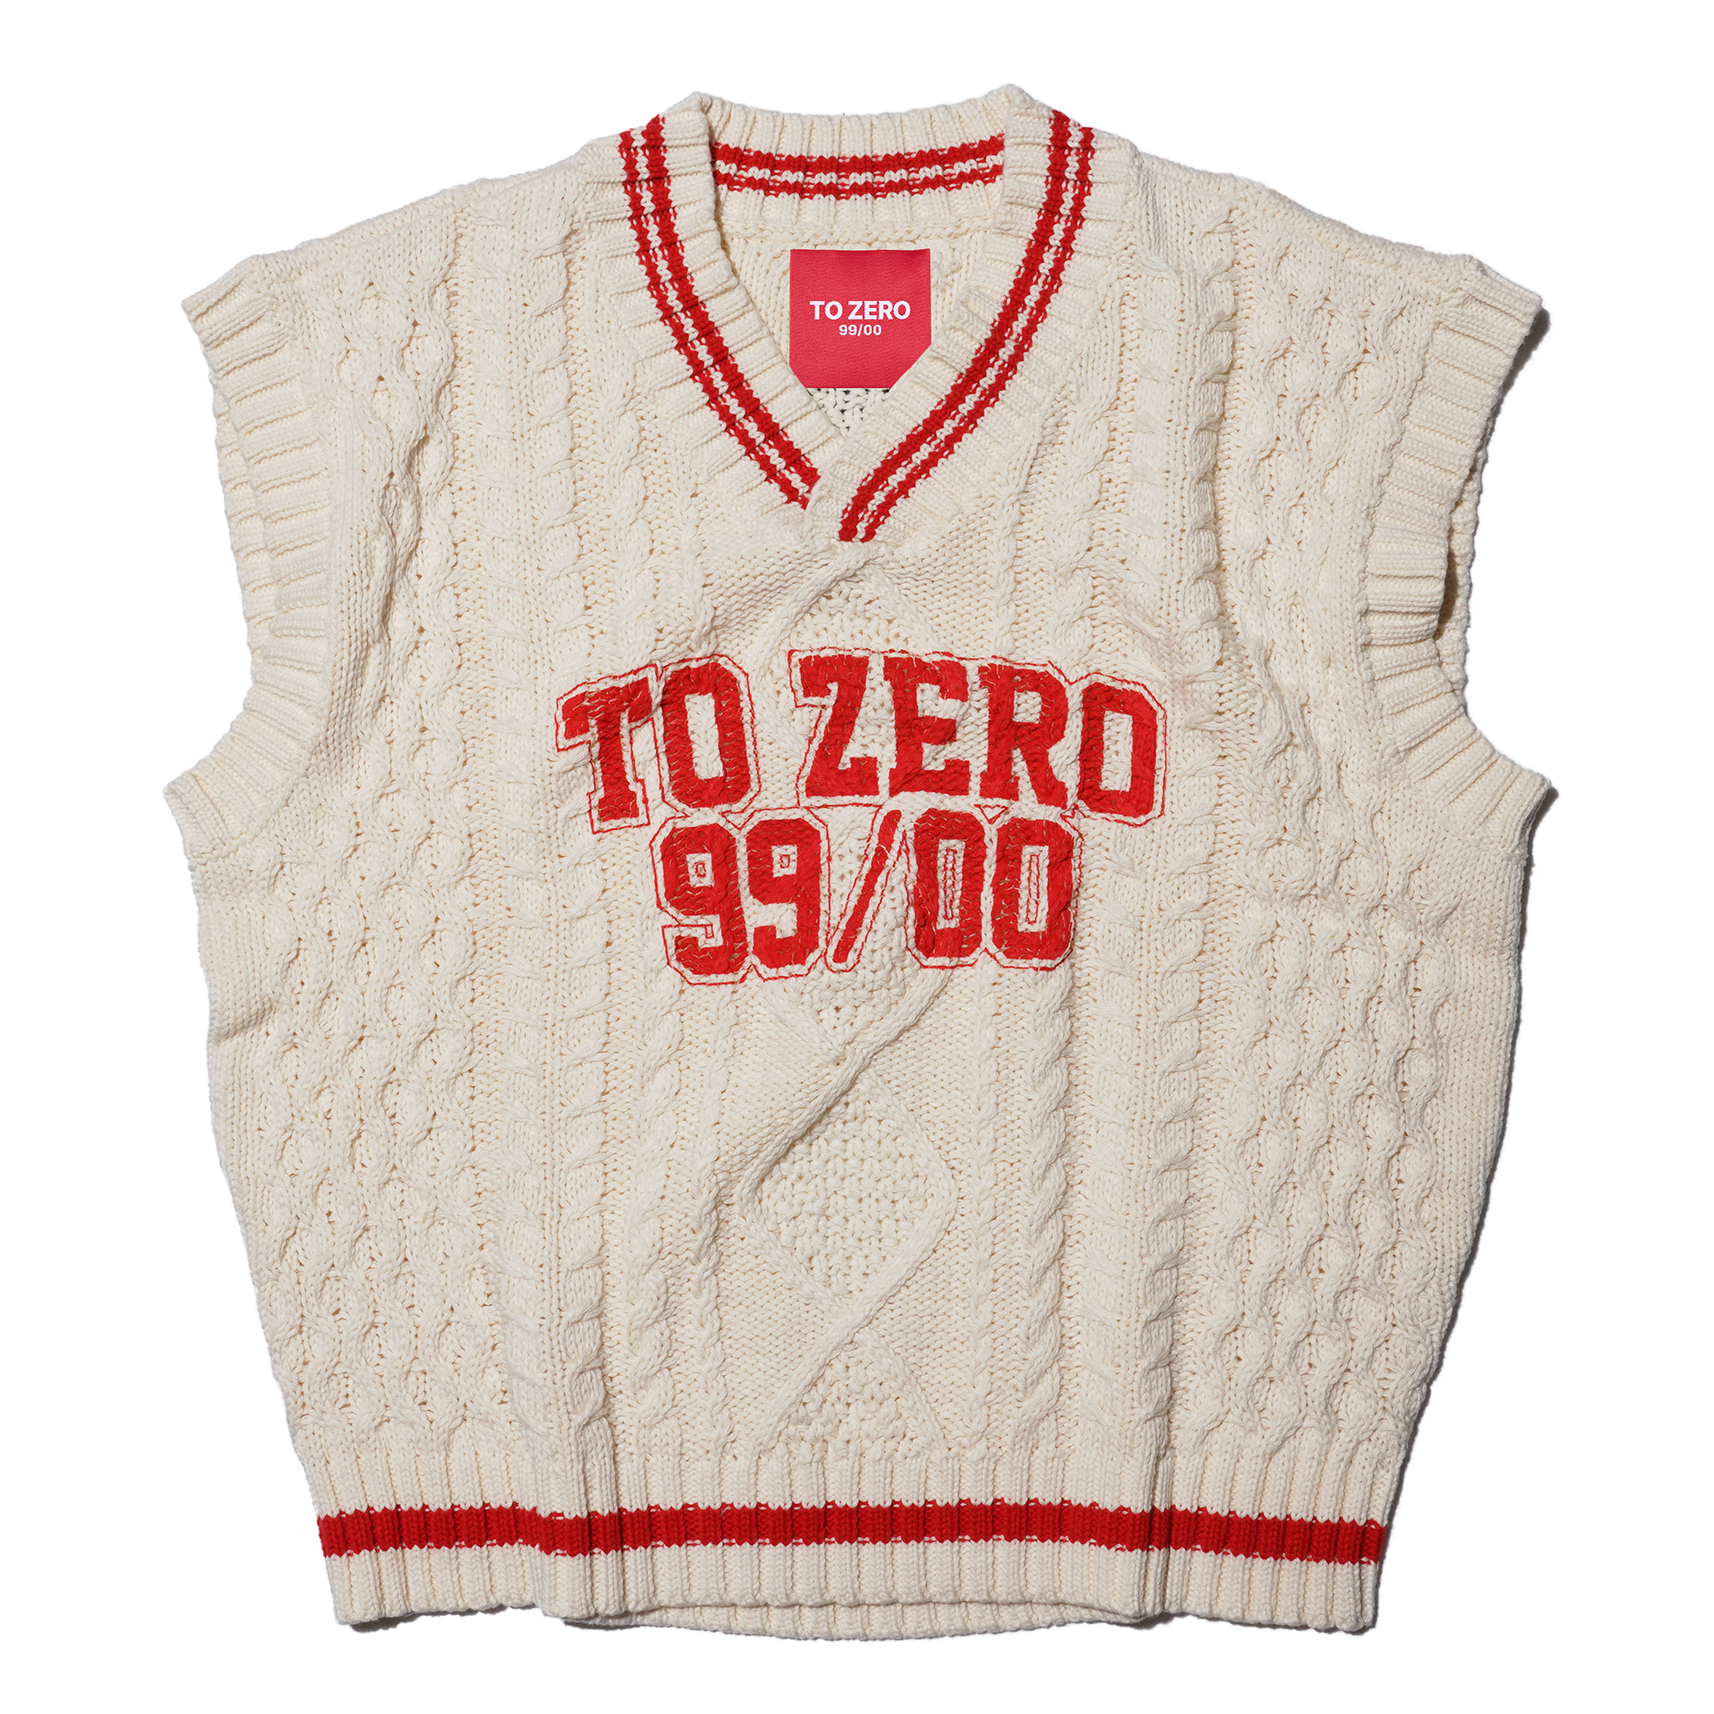 ‘TO ZERO 99/00’ Printed Cable Knit Vest